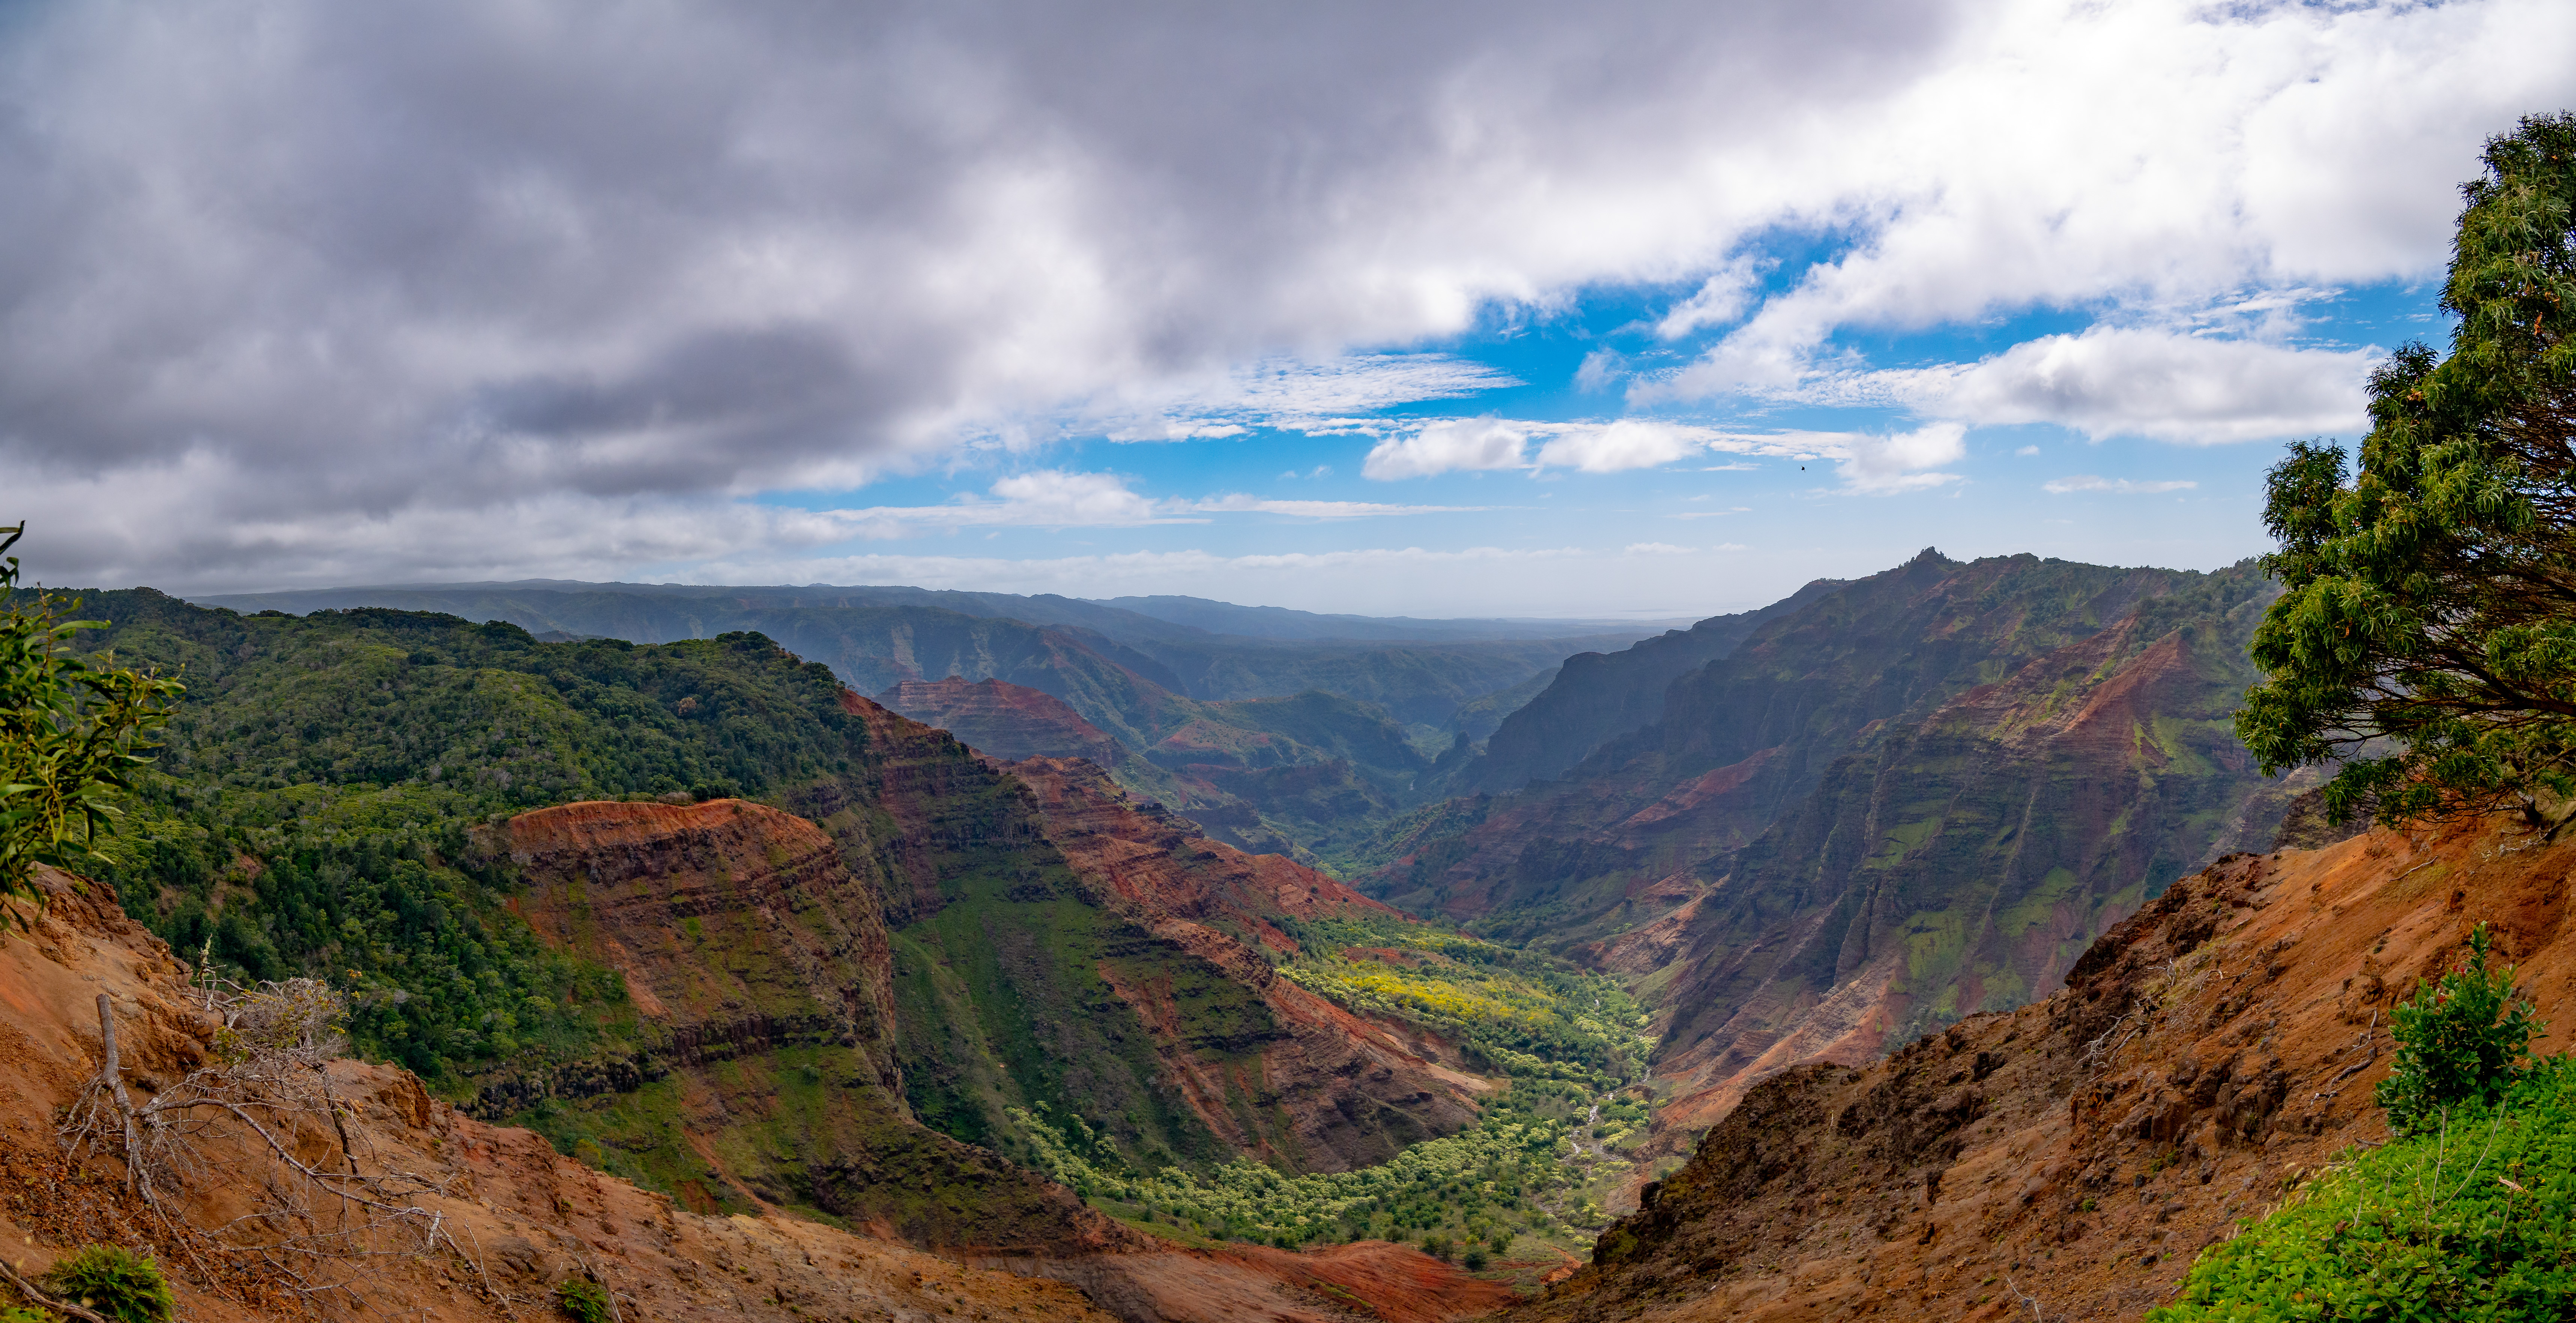 Looking down the Waimea Canyon with lush greenery and red earth